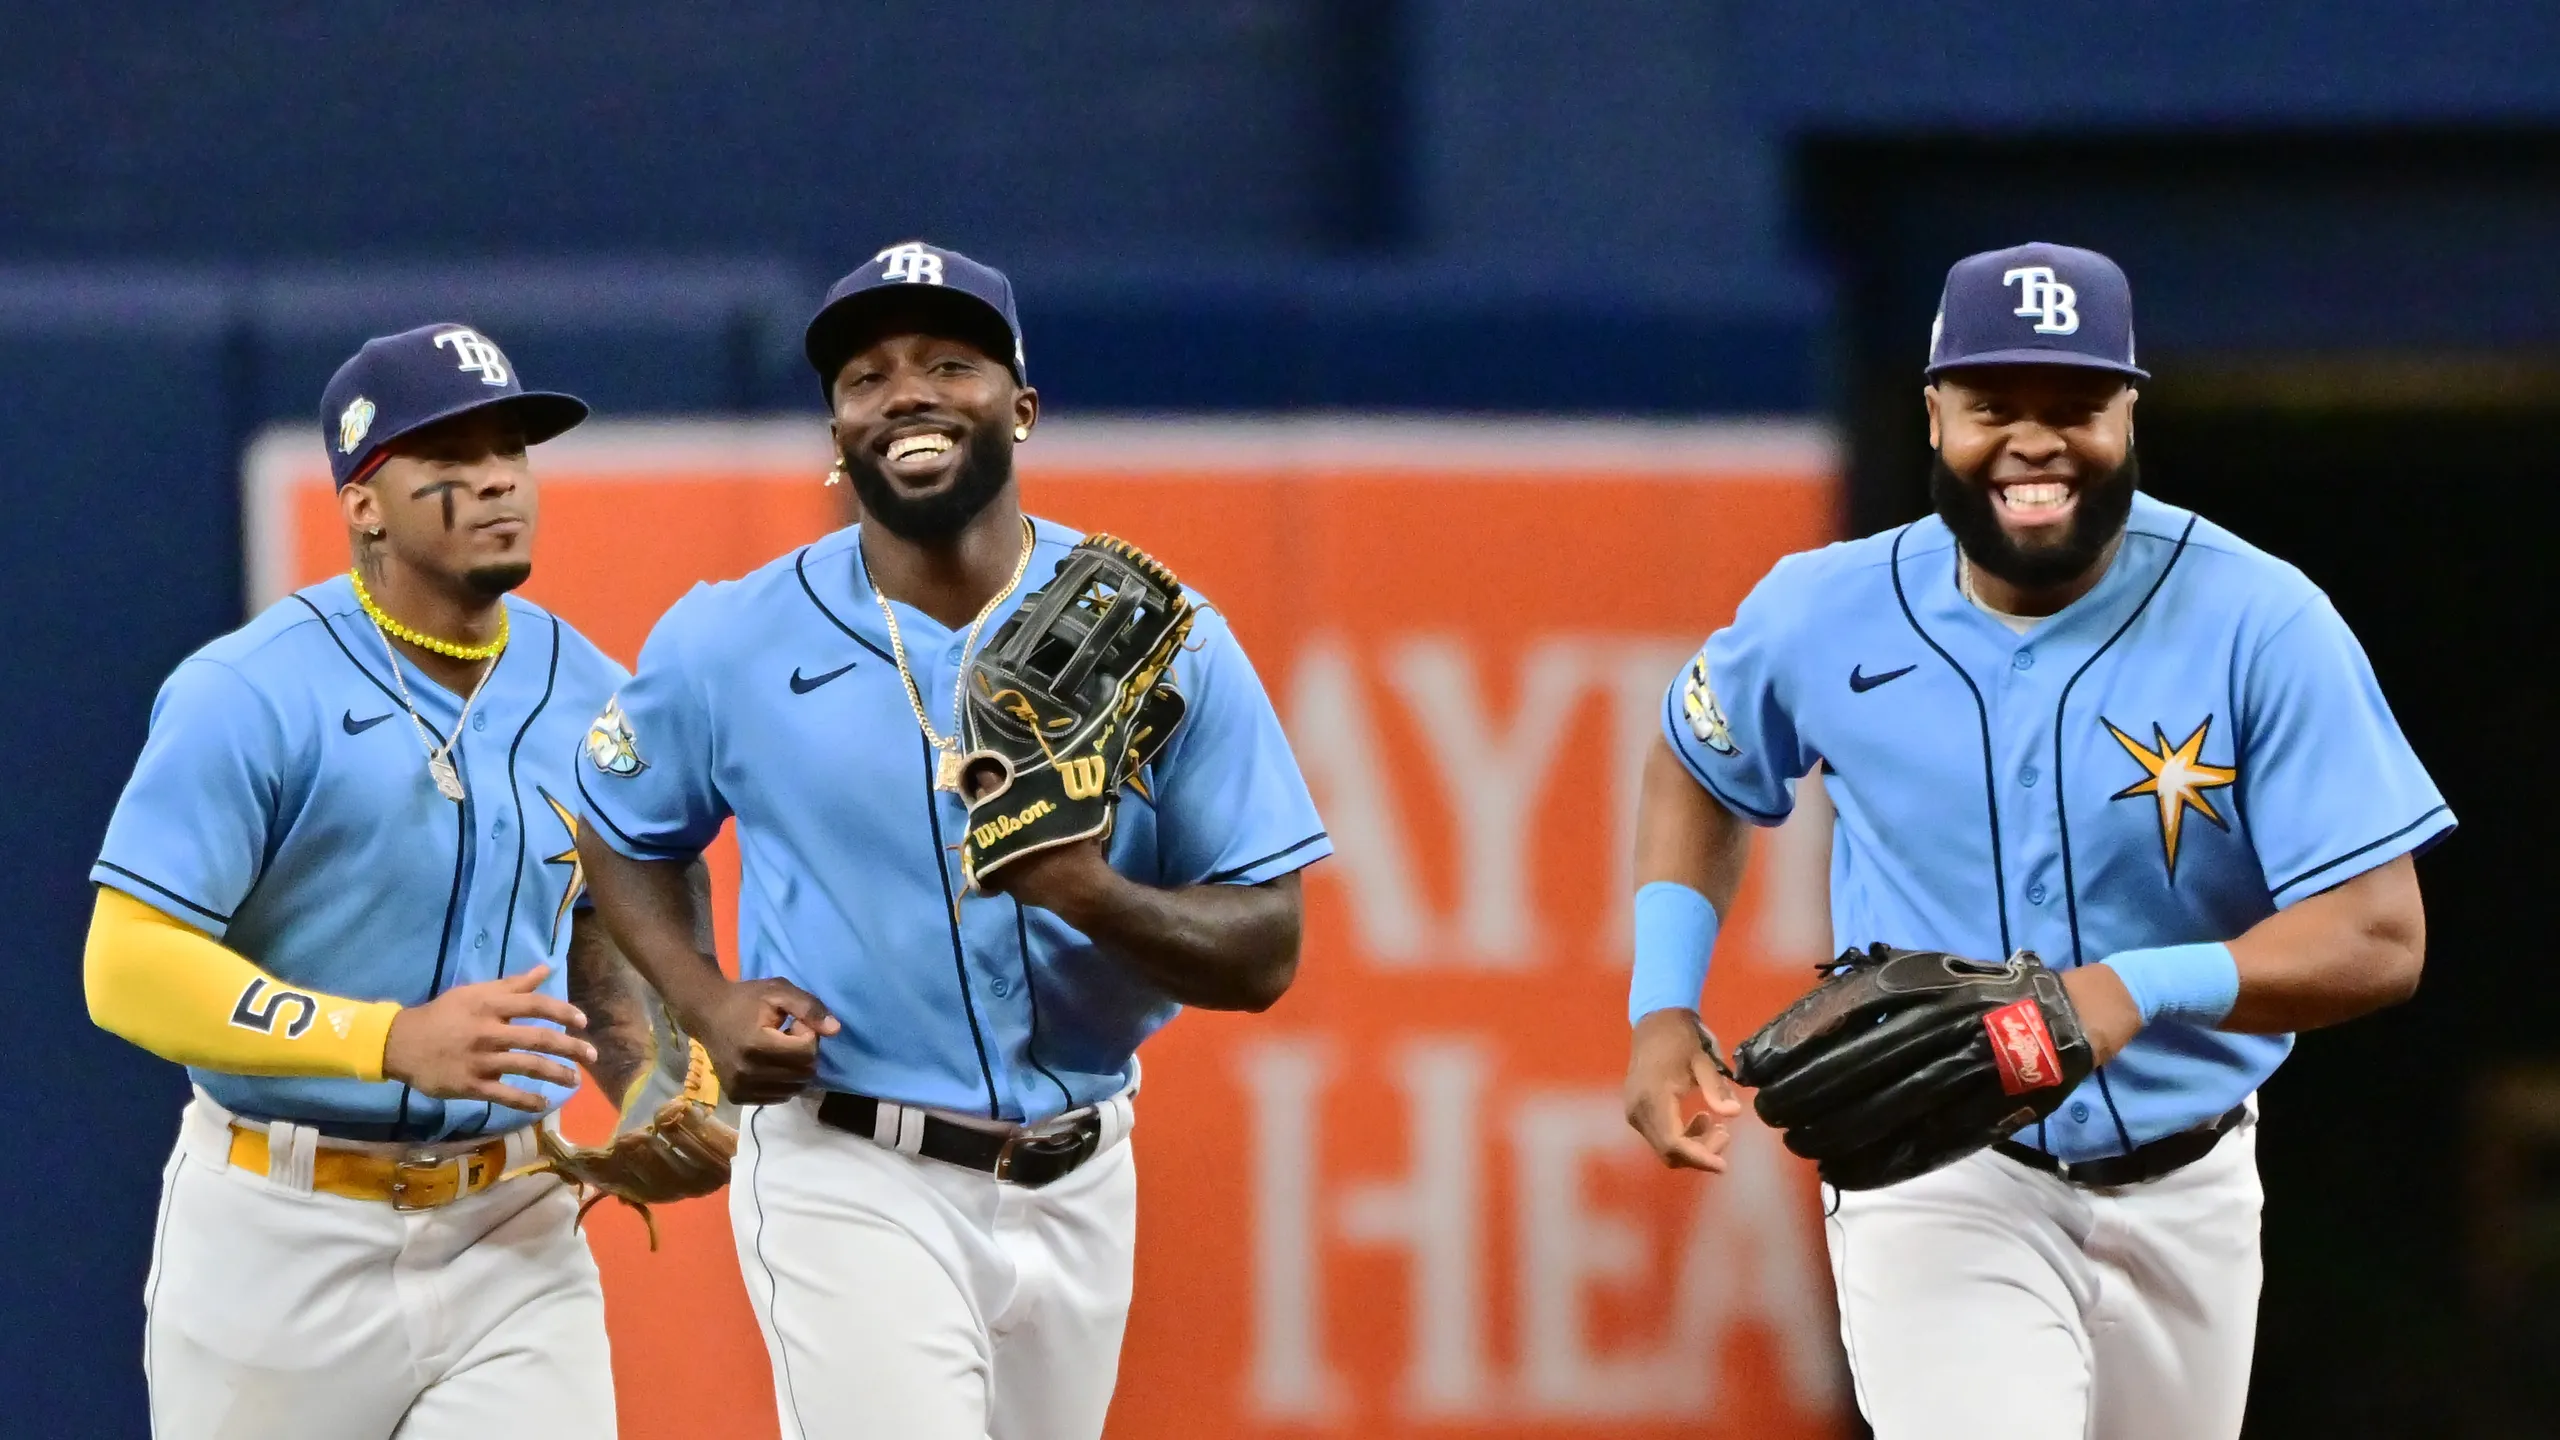 The Tampa Bay Rays face the Texas Rangers today